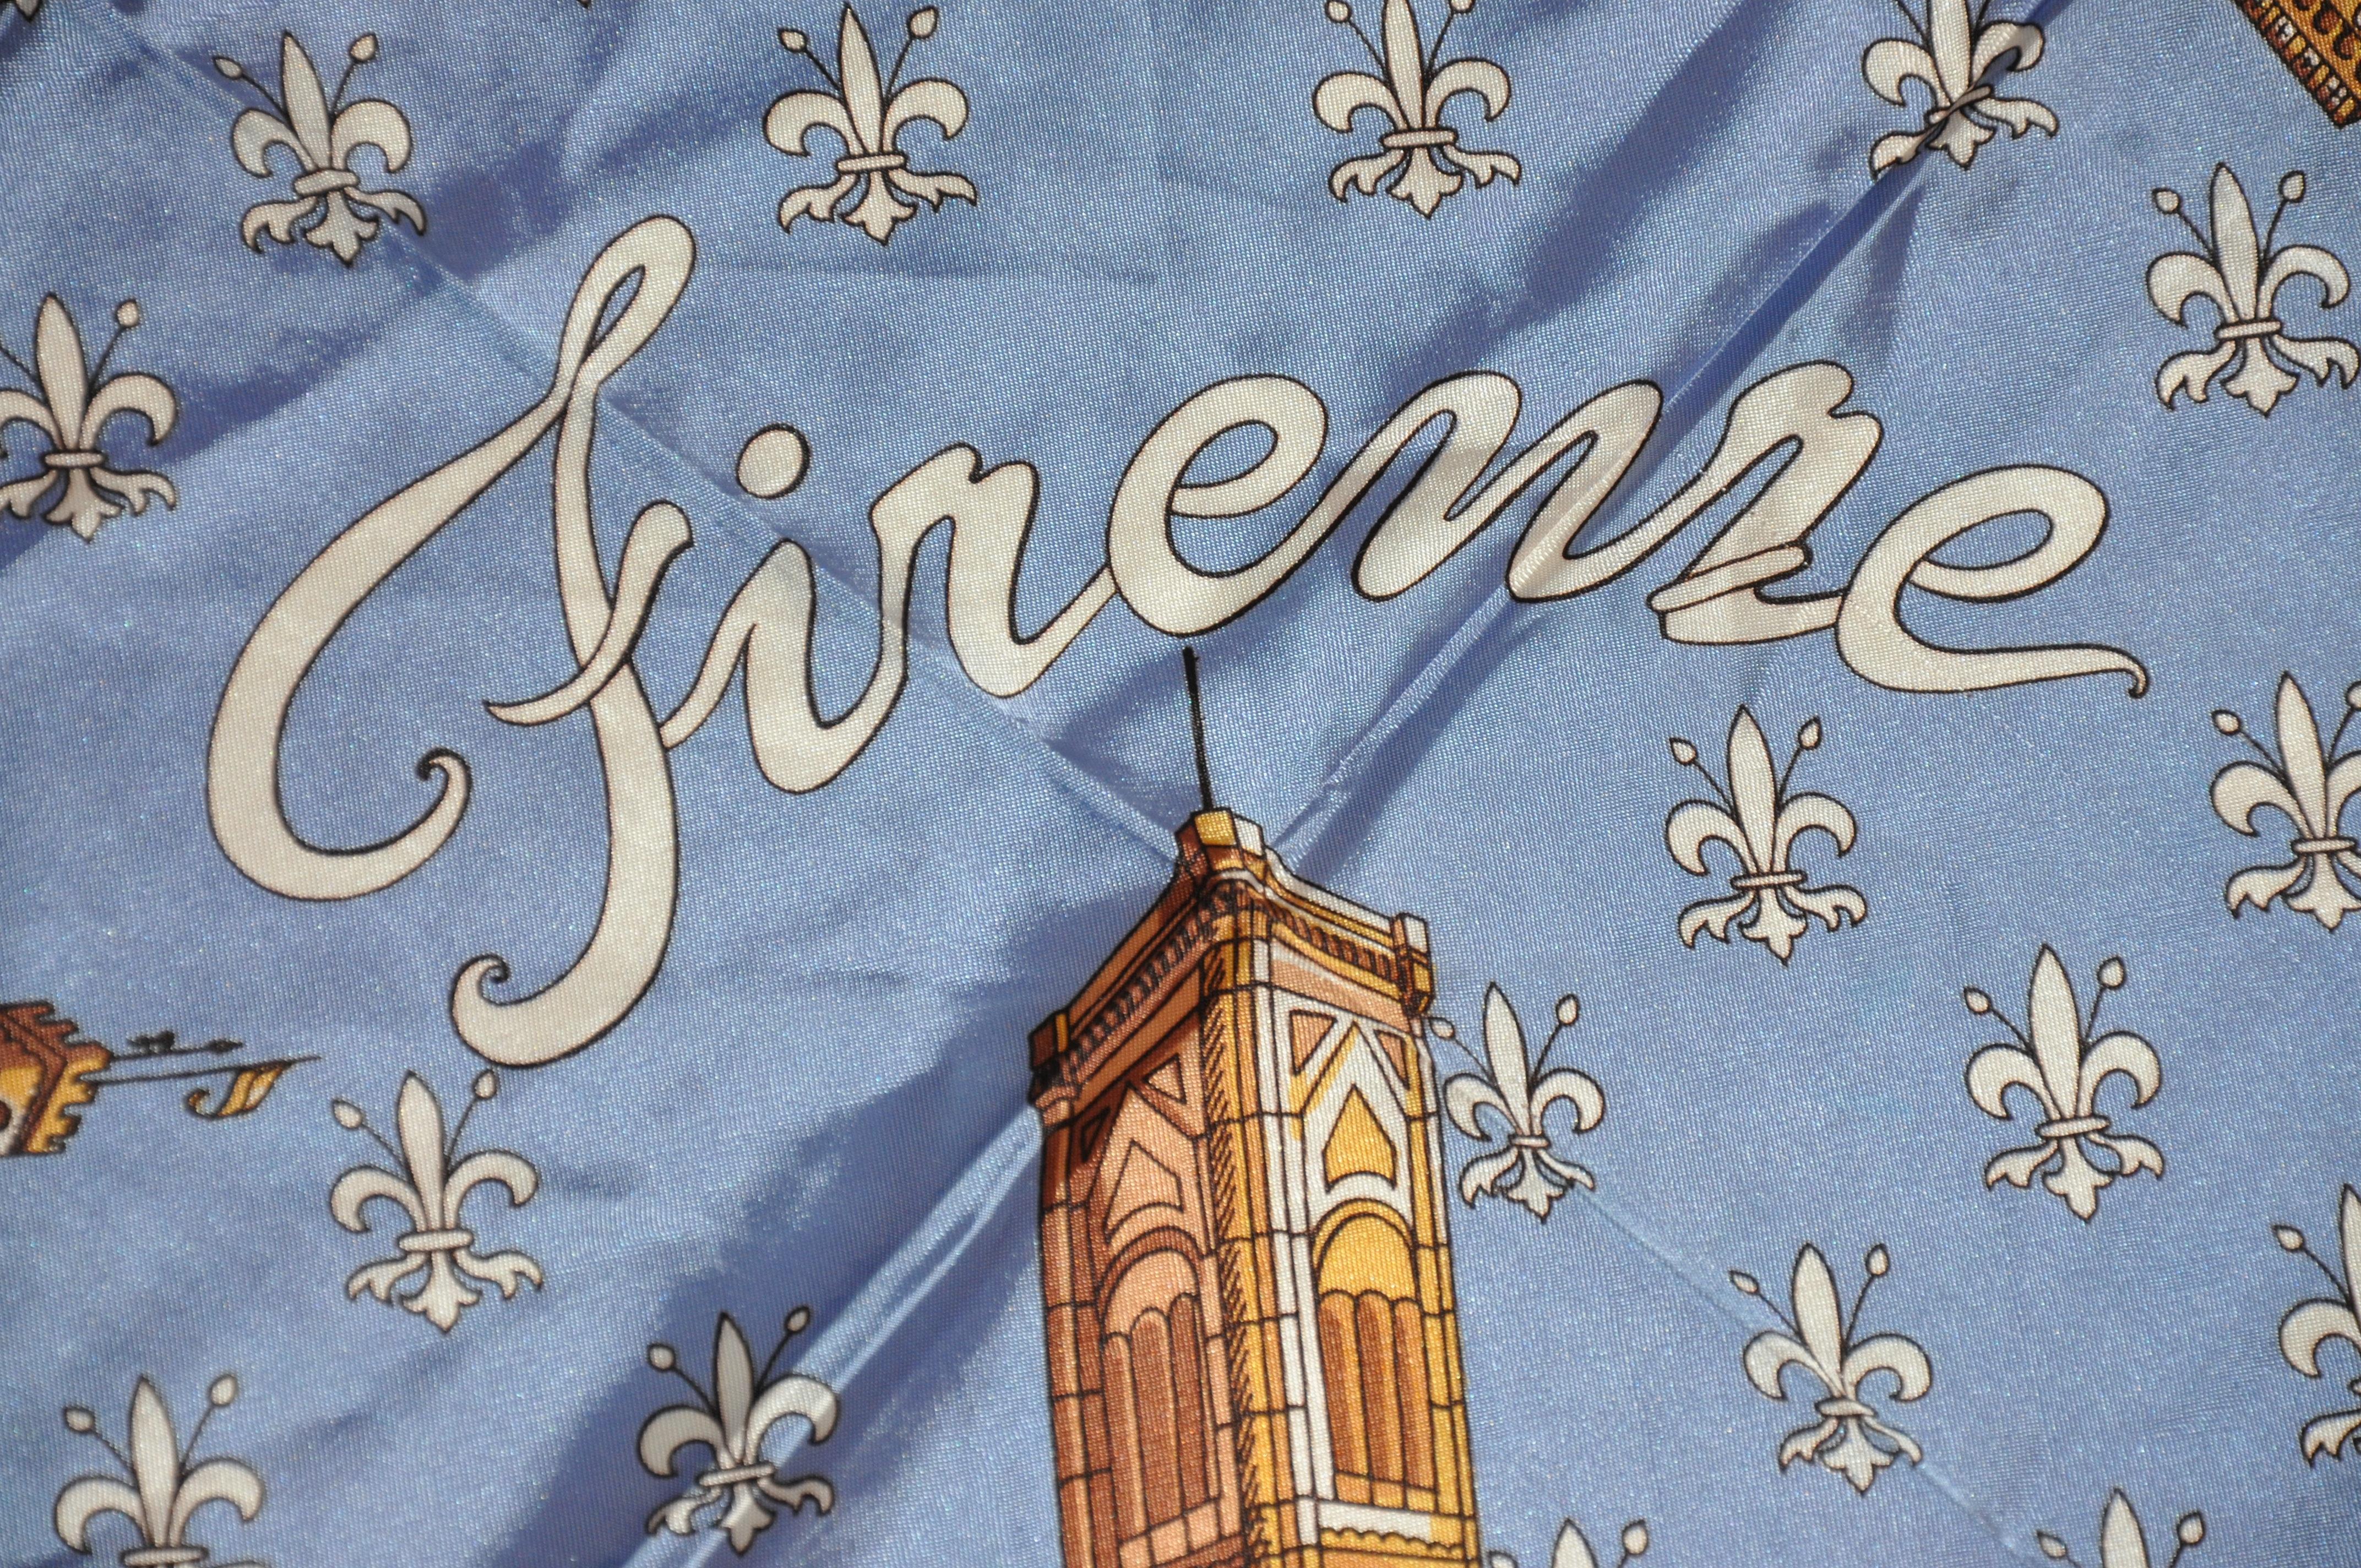      Firenne Fleur de Lis sky-blue acetate scarf with fleur de lis beautifully scattered throughout, measures 26 inches by 27 inches. Made in Italy.